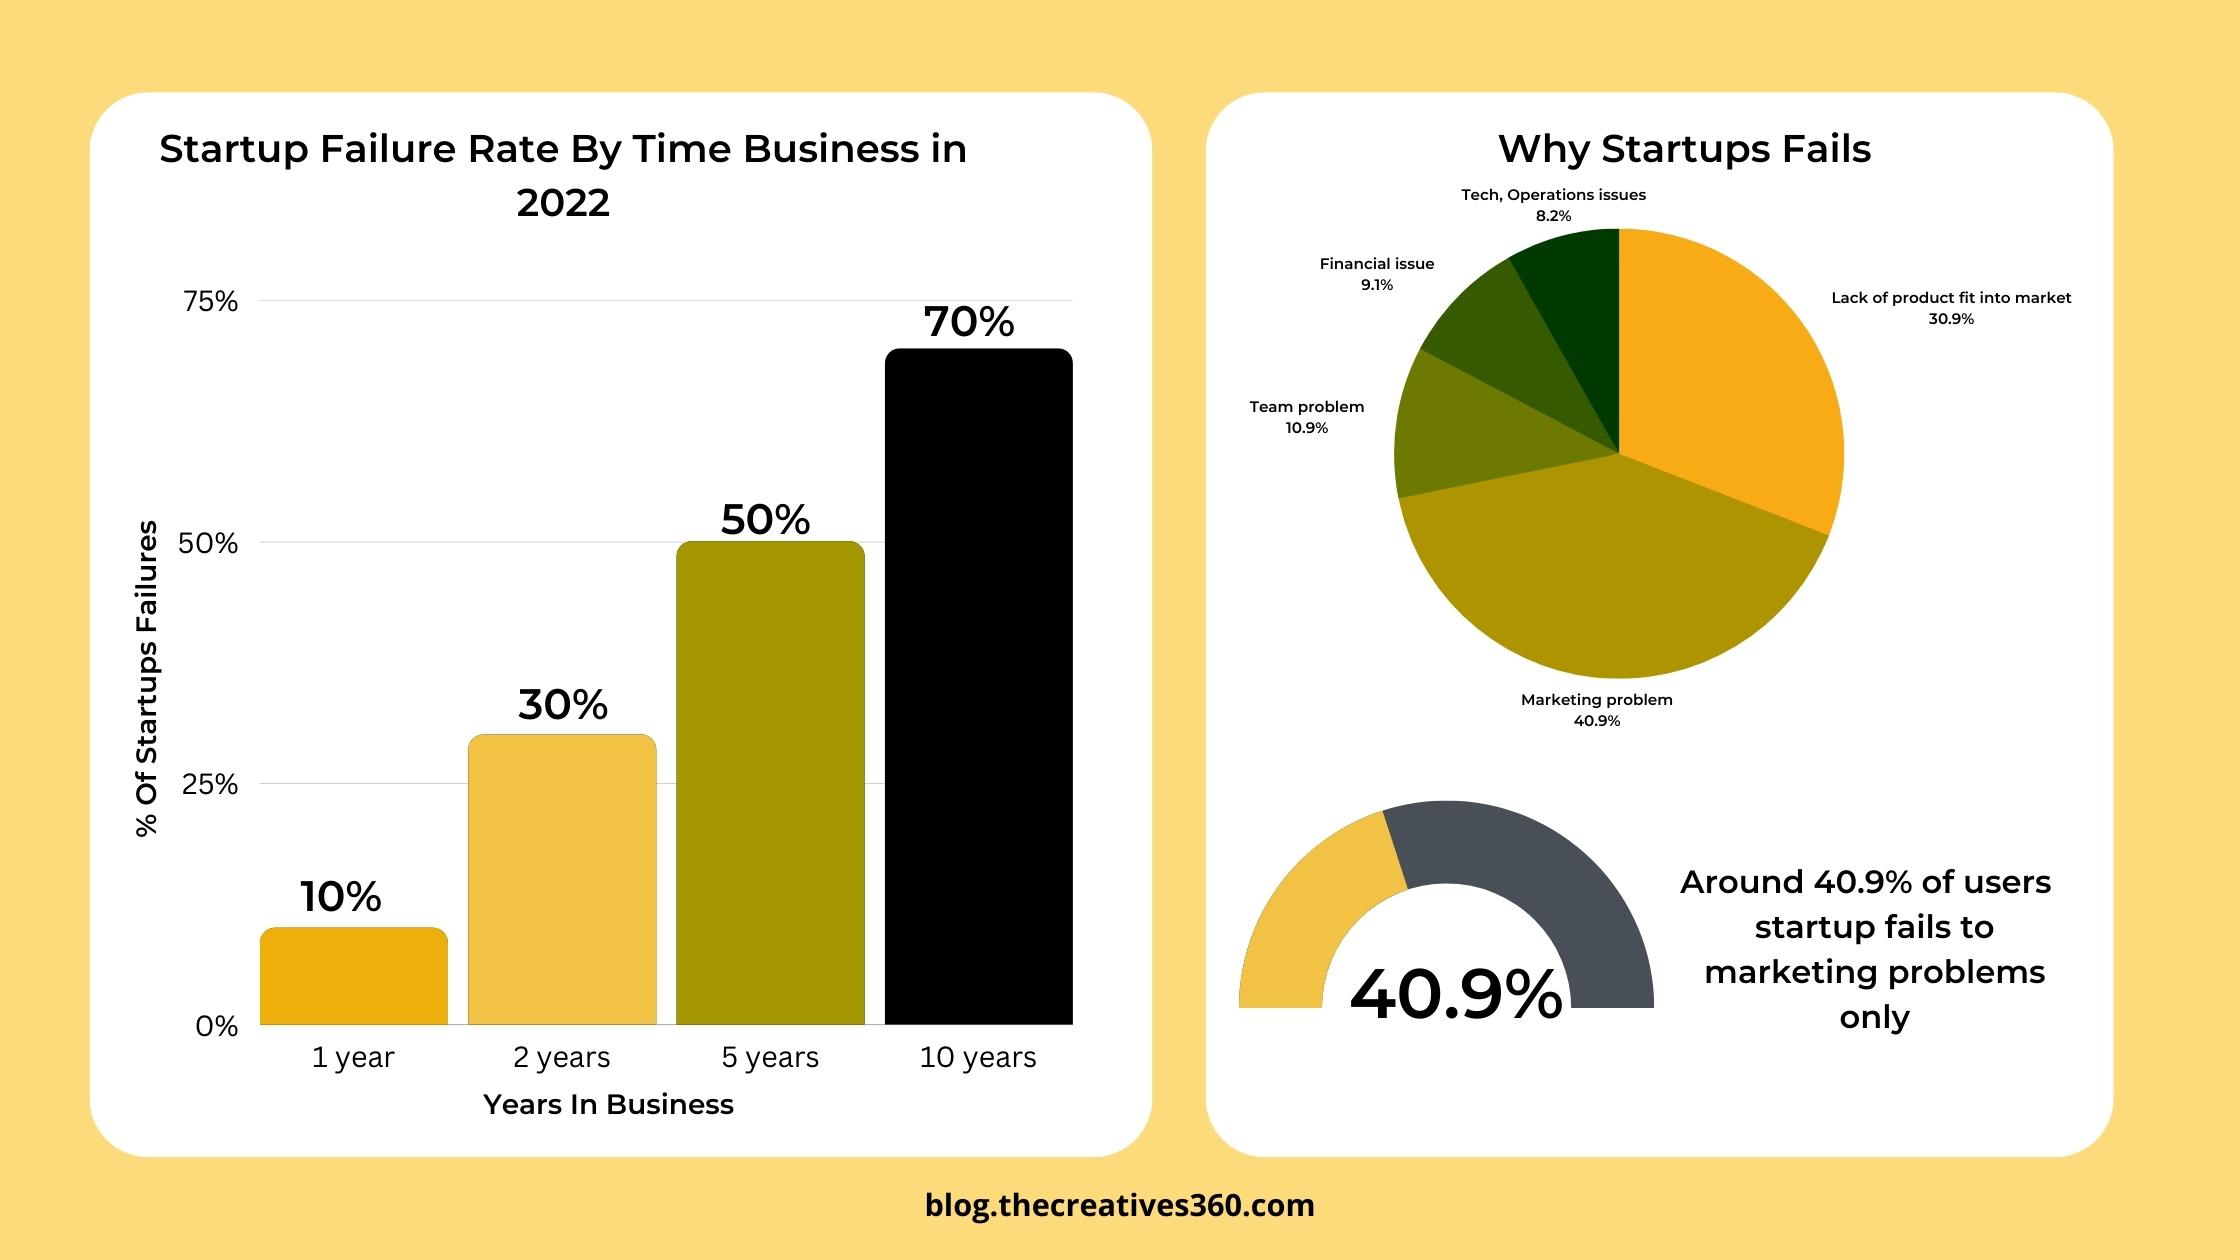 WHAT ARE THE TOP GROWTH STRATEGIES FOR STARTUPS IN 2022?